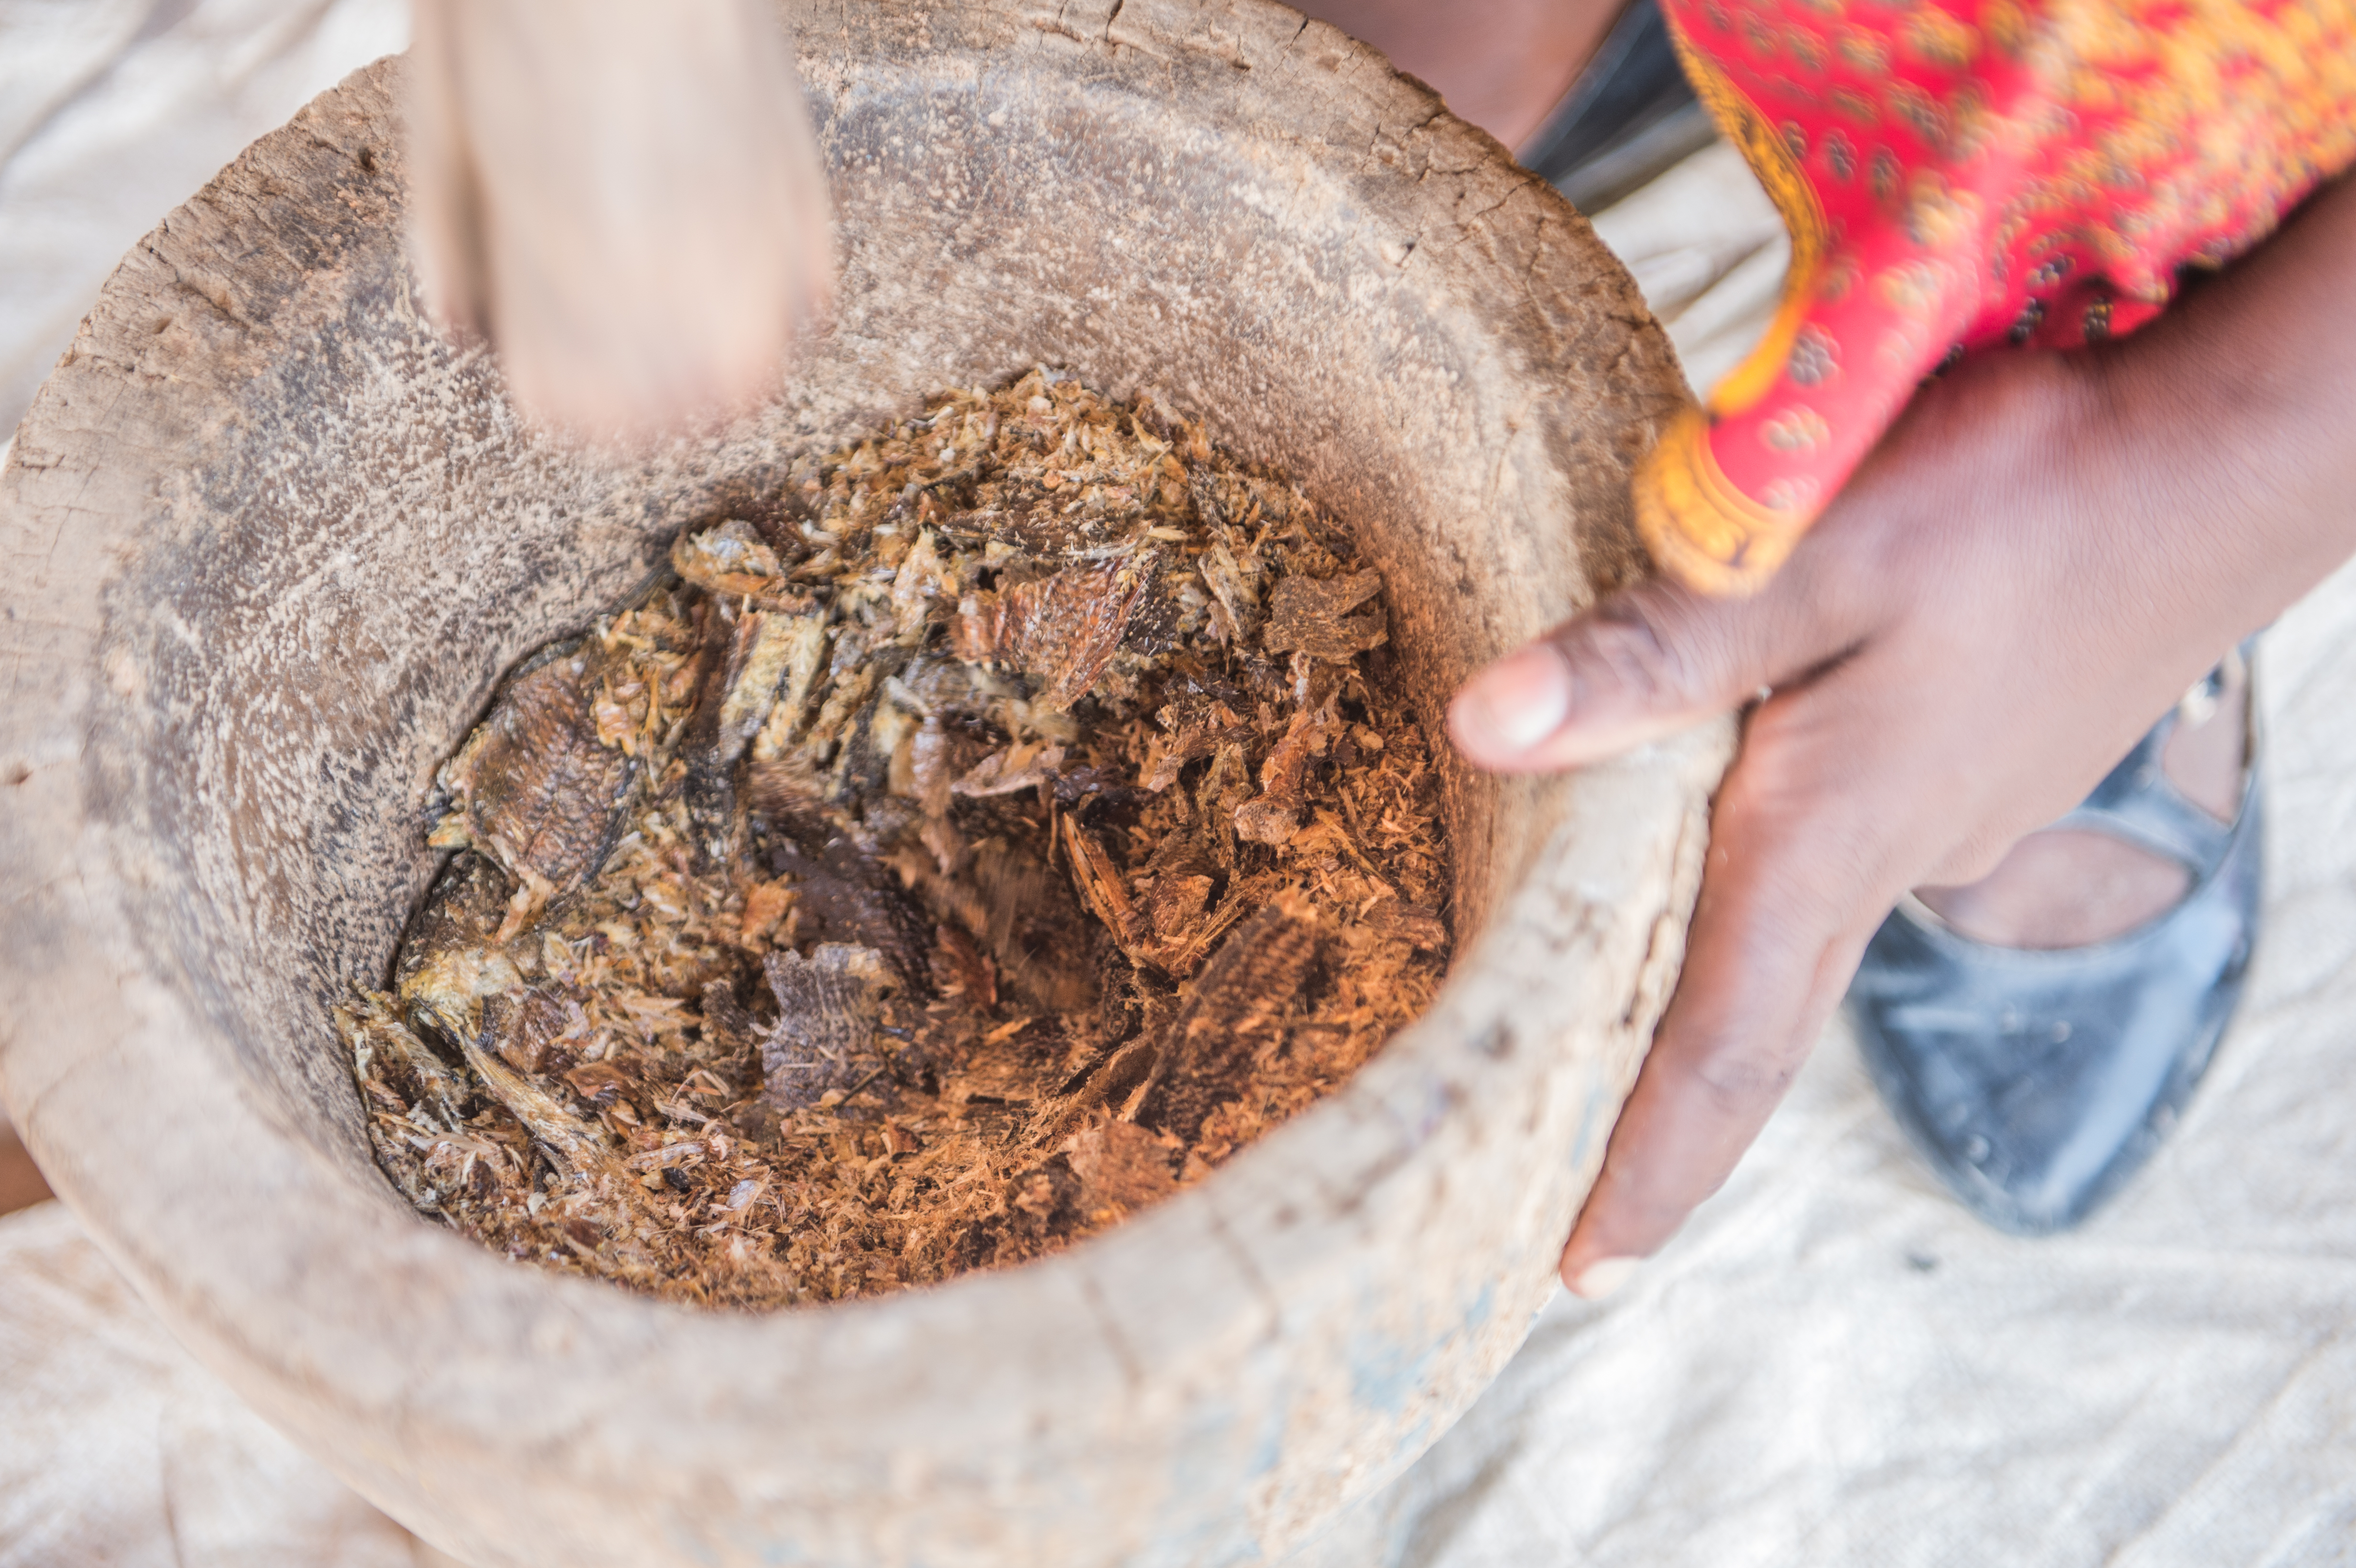 The project aims to expand the availability of nutritious aquatic food products and provide support across the supply chain. Photo by Chosa Mweemba 